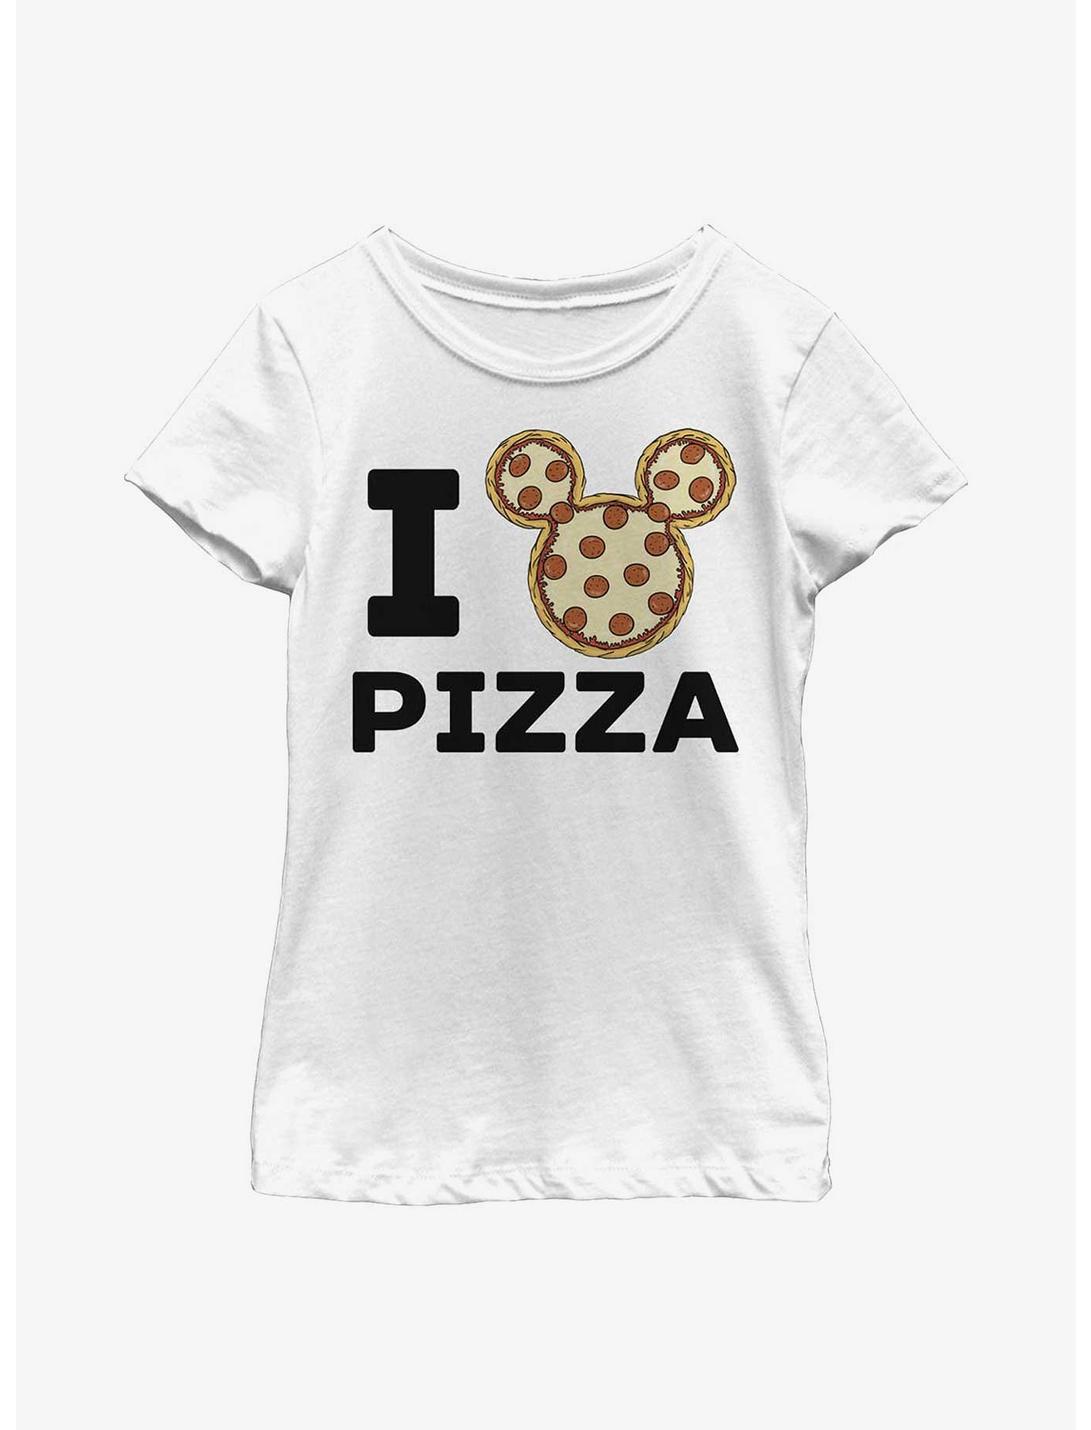 Disney Mickey Mouse Mickey Pizza Youth Girls T-Shirt, WHITE, hi-res